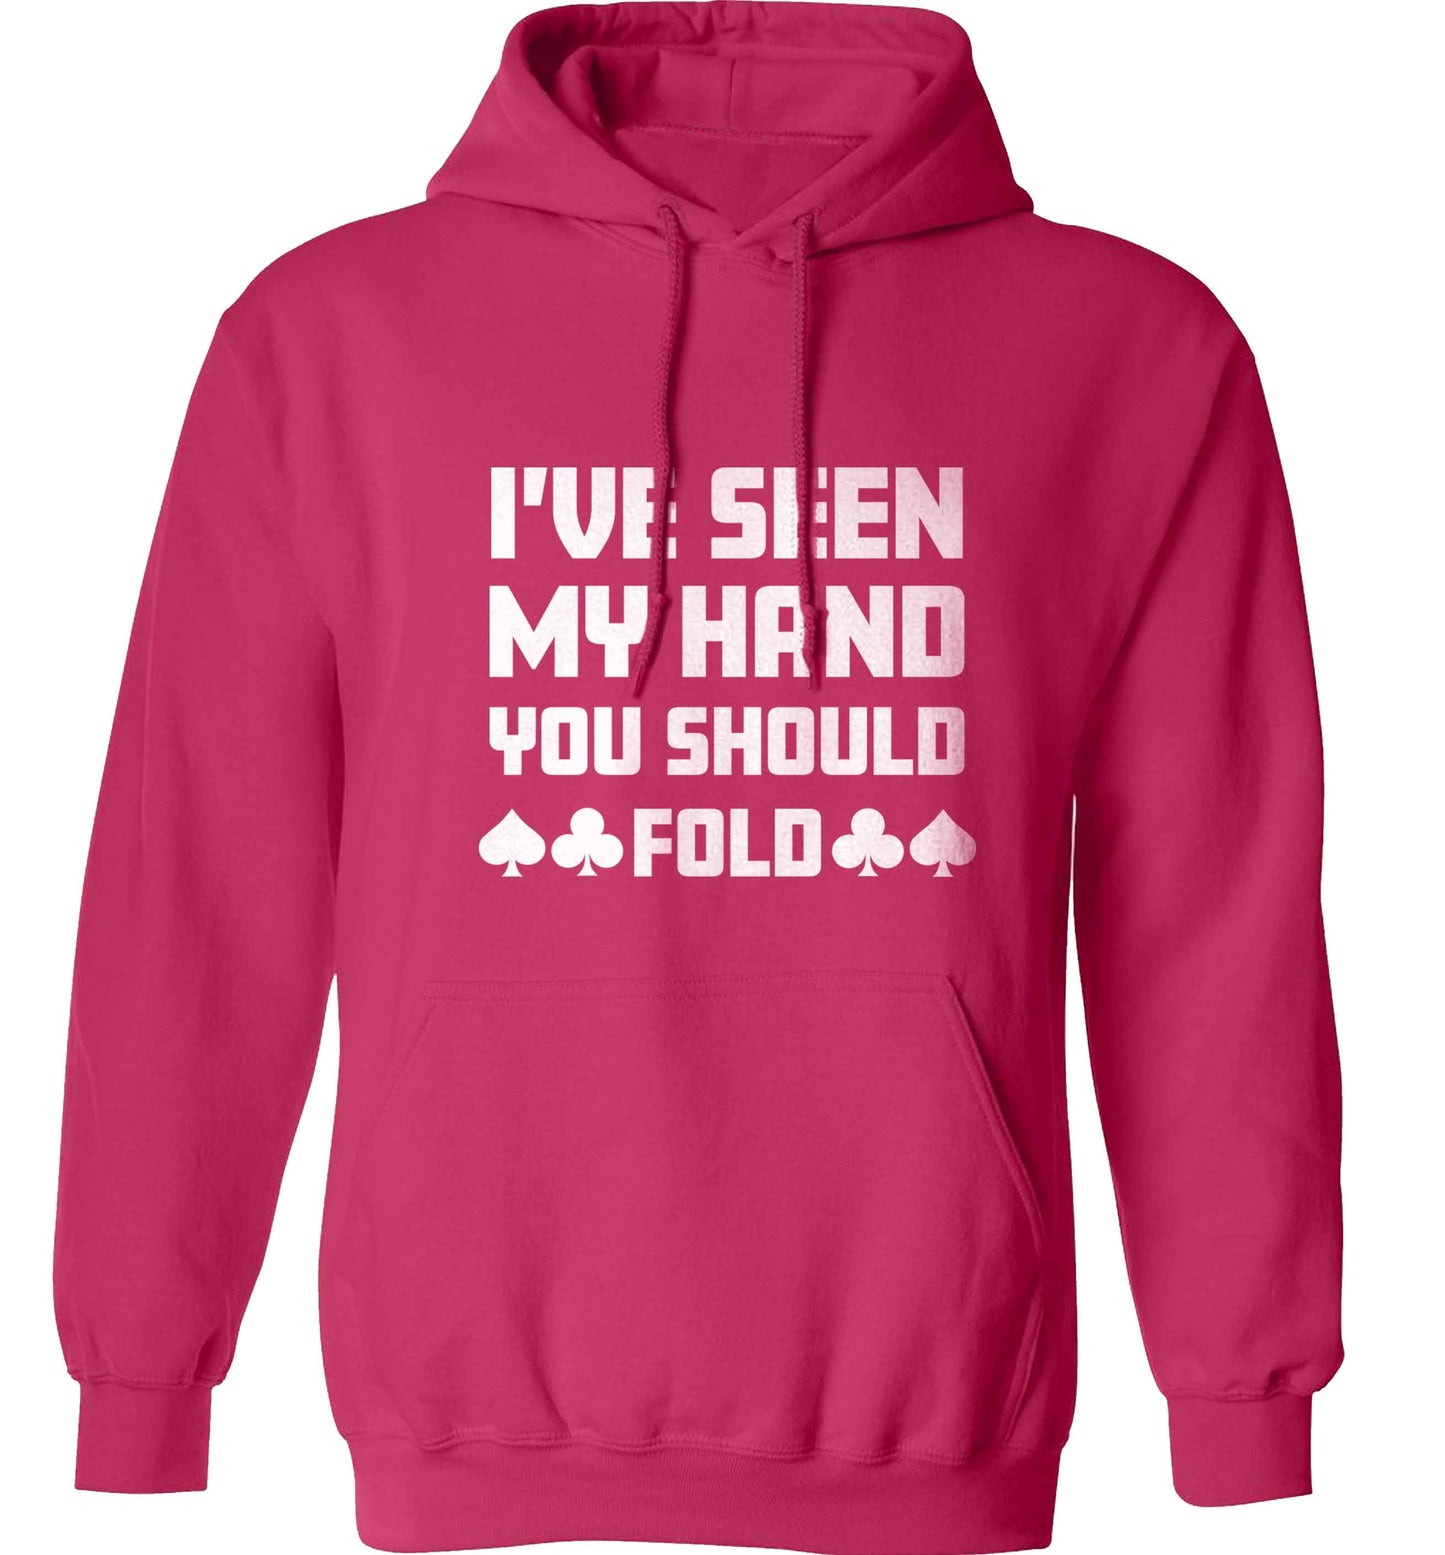 I've seen my hand you should fold adults unisex pink hoodie 2XL